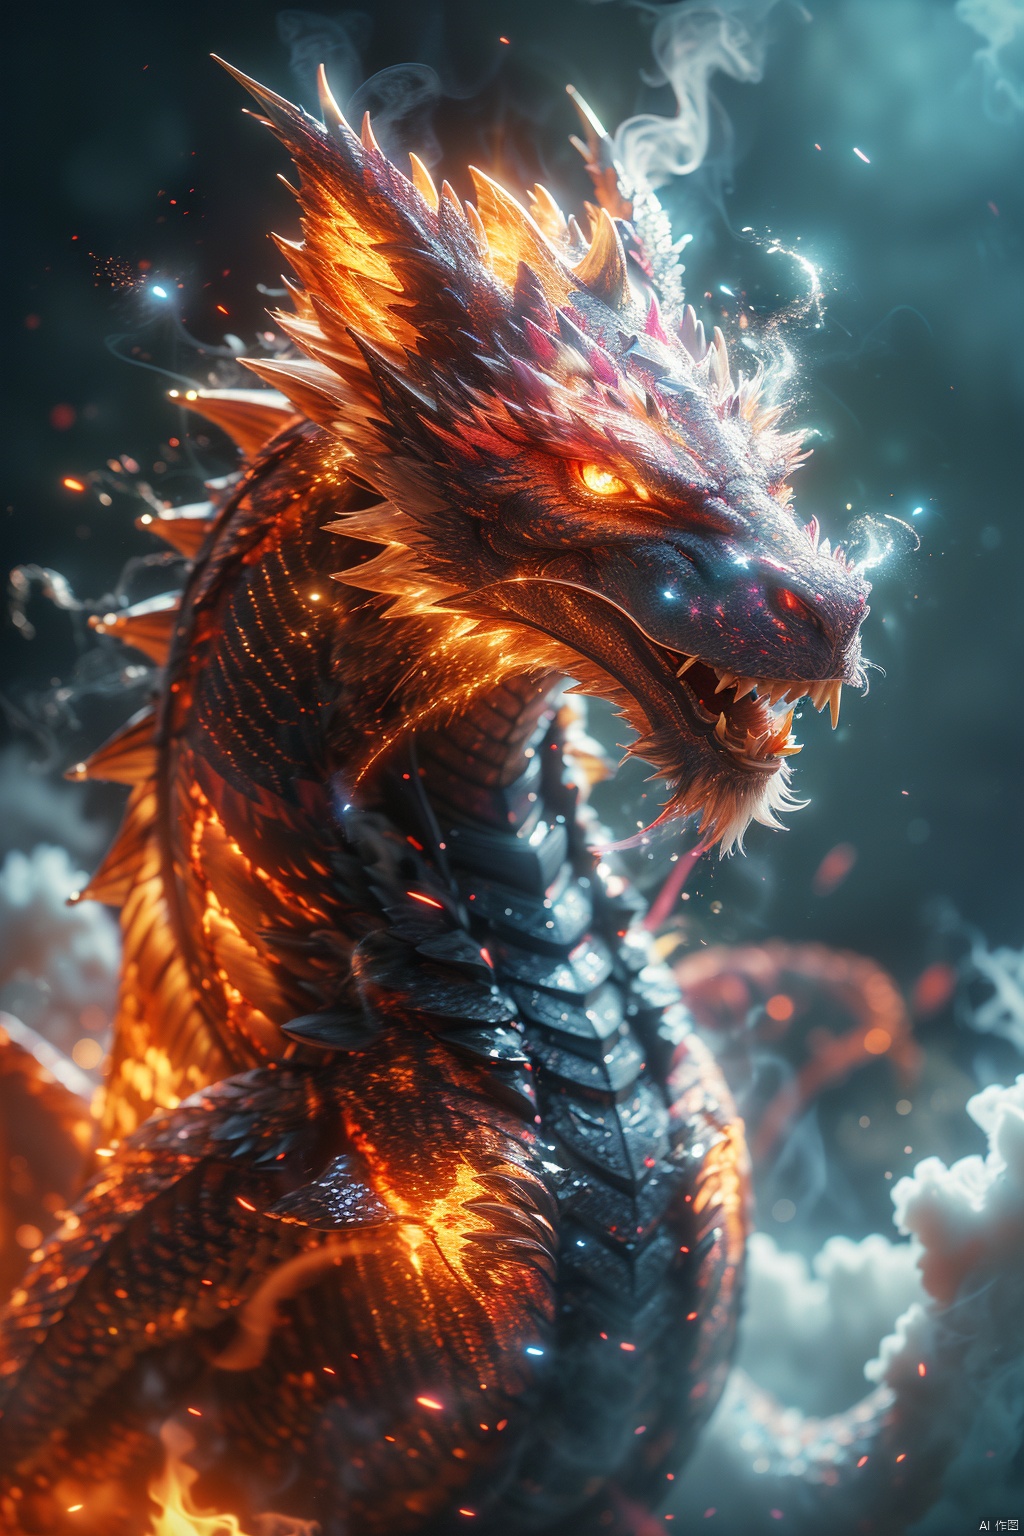  Oriental Dragon,flame, burning,sparks,light particles,yinghuo,Colorful flames